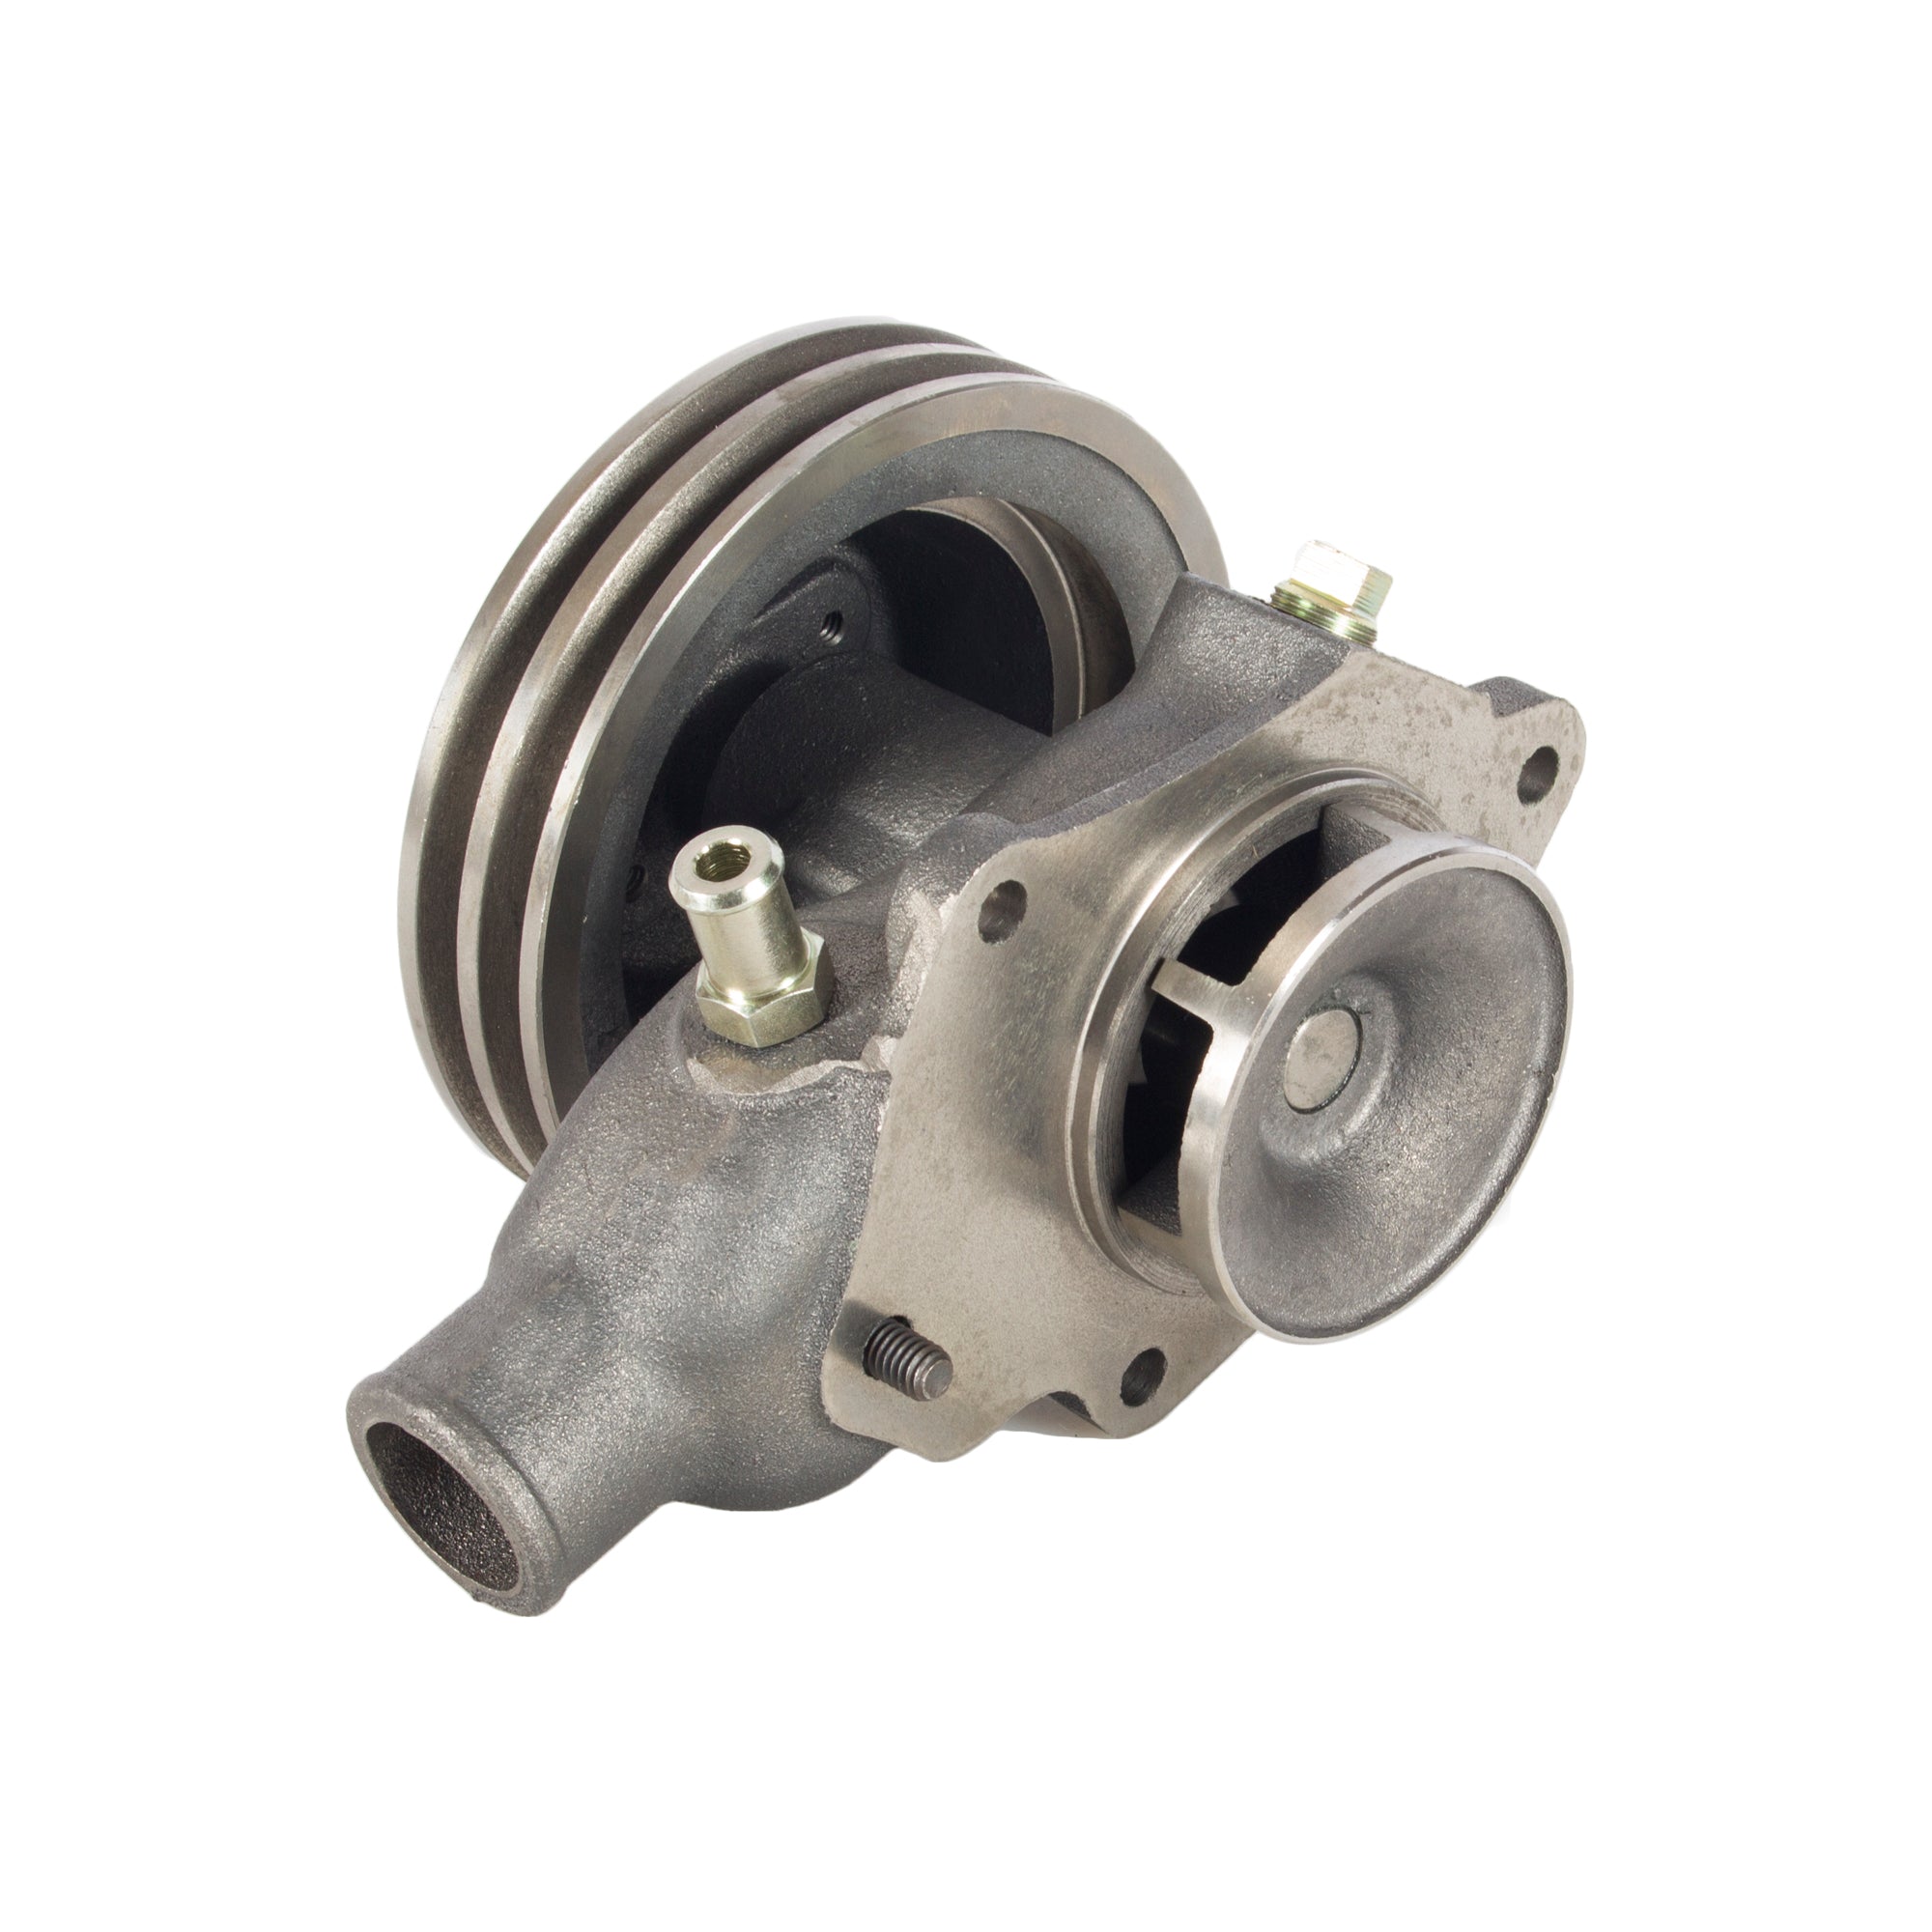 Water Pump Replacement for Willys;M38A1,M38 WO-800002